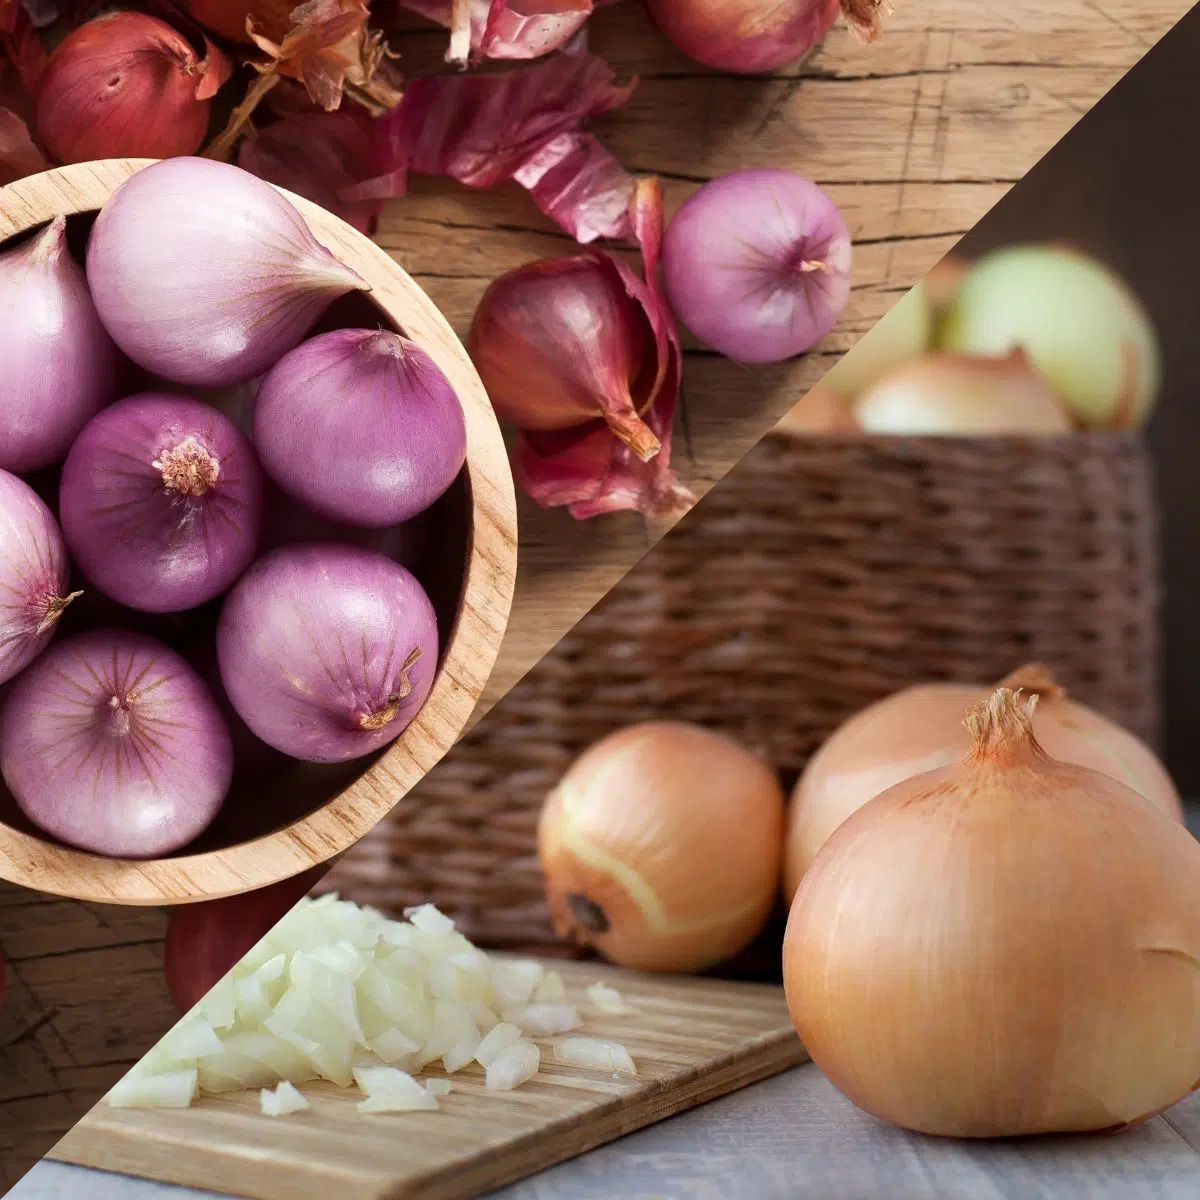 Difference between shallots vs onions and how to use each best.